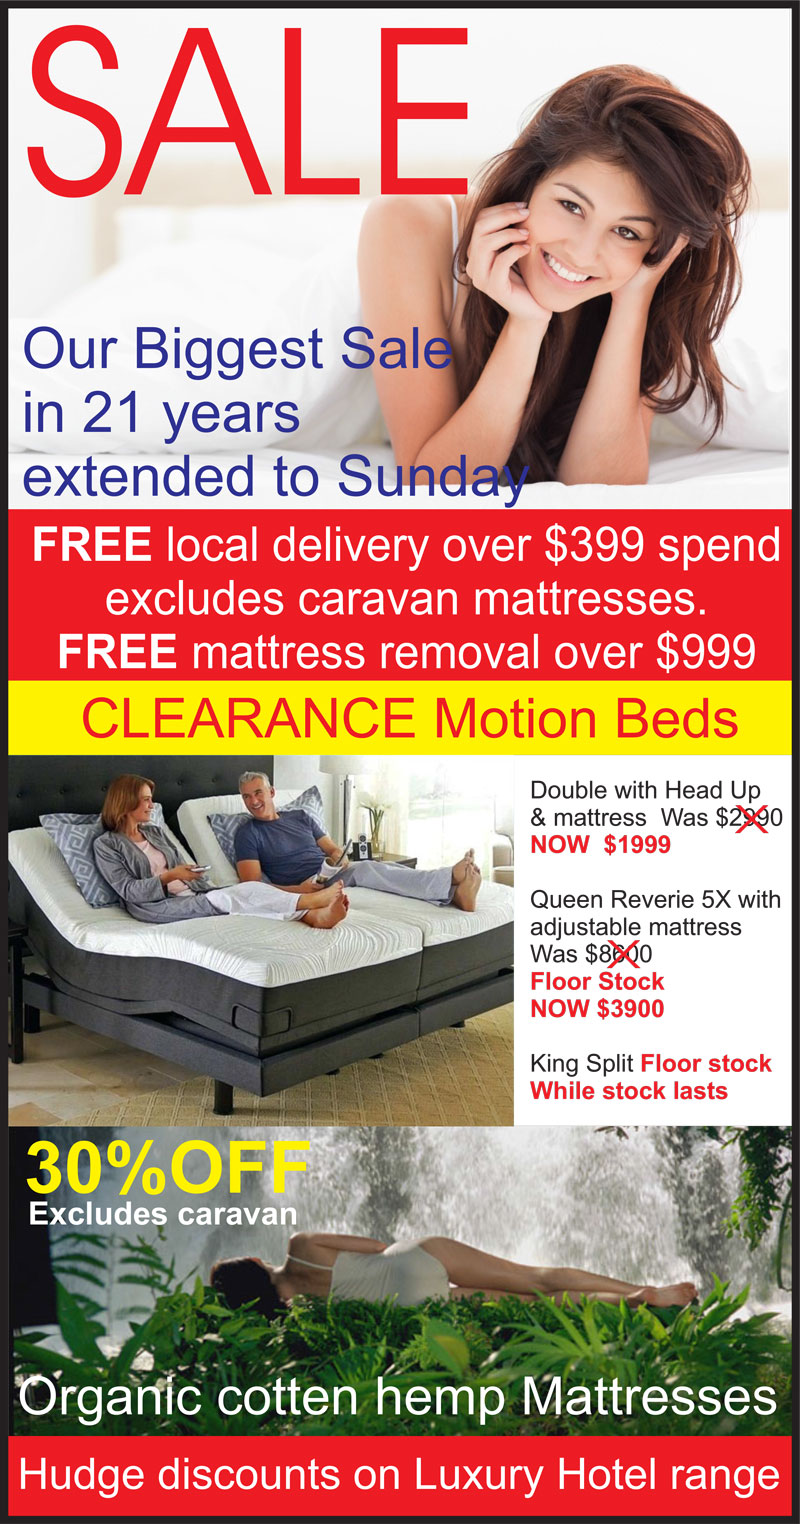 Mattresses Direct To Public April Mattress Sale - Huge Savings on Australian Made Mattresses including Organic Cotton & Hemp Mattresses. Plus Great Prices on Clearance Motion Beds.